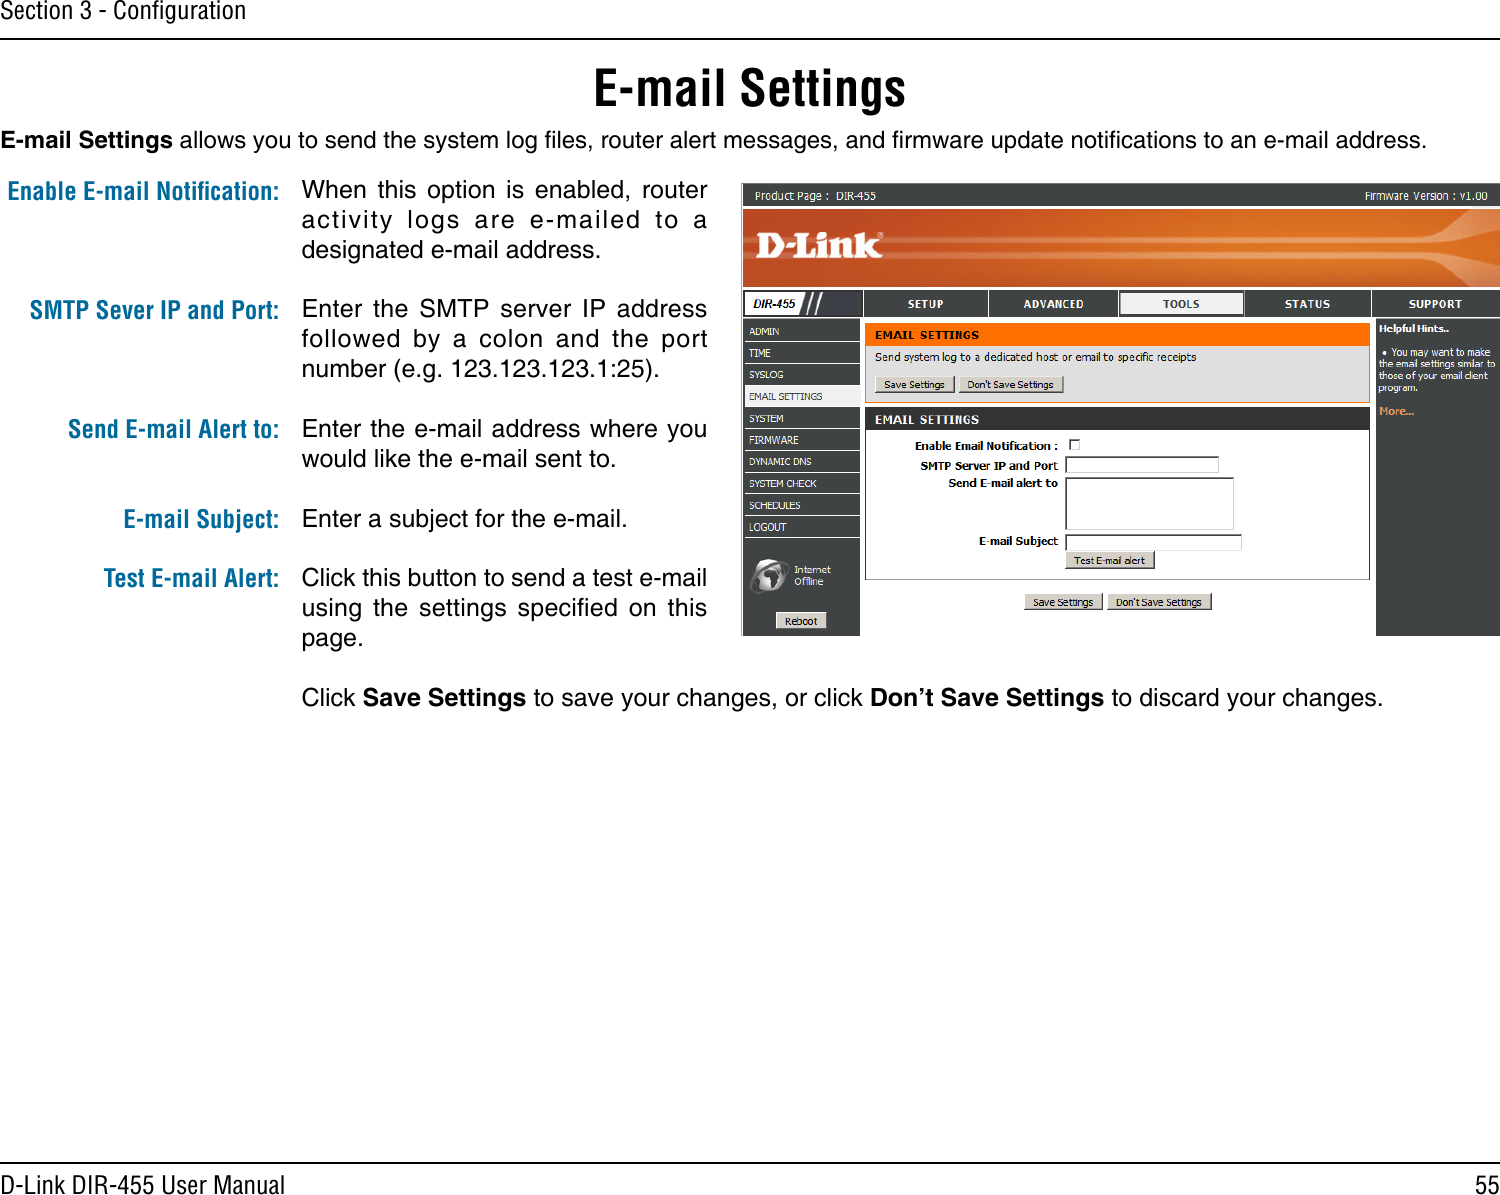 55D-Link DIR-455 User ManualSection 3 - ConﬁgurationE-mail SettingsWhen  this  option  is  enabled,  router activity  logs  are  e-mailed  to  a designated e-mail address.Enter  the  SMTP  server  IP  address followed  by  a  colon  and  the  port number (e.g. 123.123.123.1:25).Enter the e-mail address where you would like the e-mail sent to.Enter a subject for the e-mail.Click this button to send a test e-mail using  the  settings  specied  on  this page.Click Save Settings to save your changes, or click Don’t Save Settings to discard your changes.Enable E-mail Notiﬁcation:SMTP Sever IP and Port:  Send E-mail Alert to: E-mail Subject:Test E-mail Alert:E-mail Settings allows you to send the system log les, router alert messages, and rmware update notications to an e-mail address.